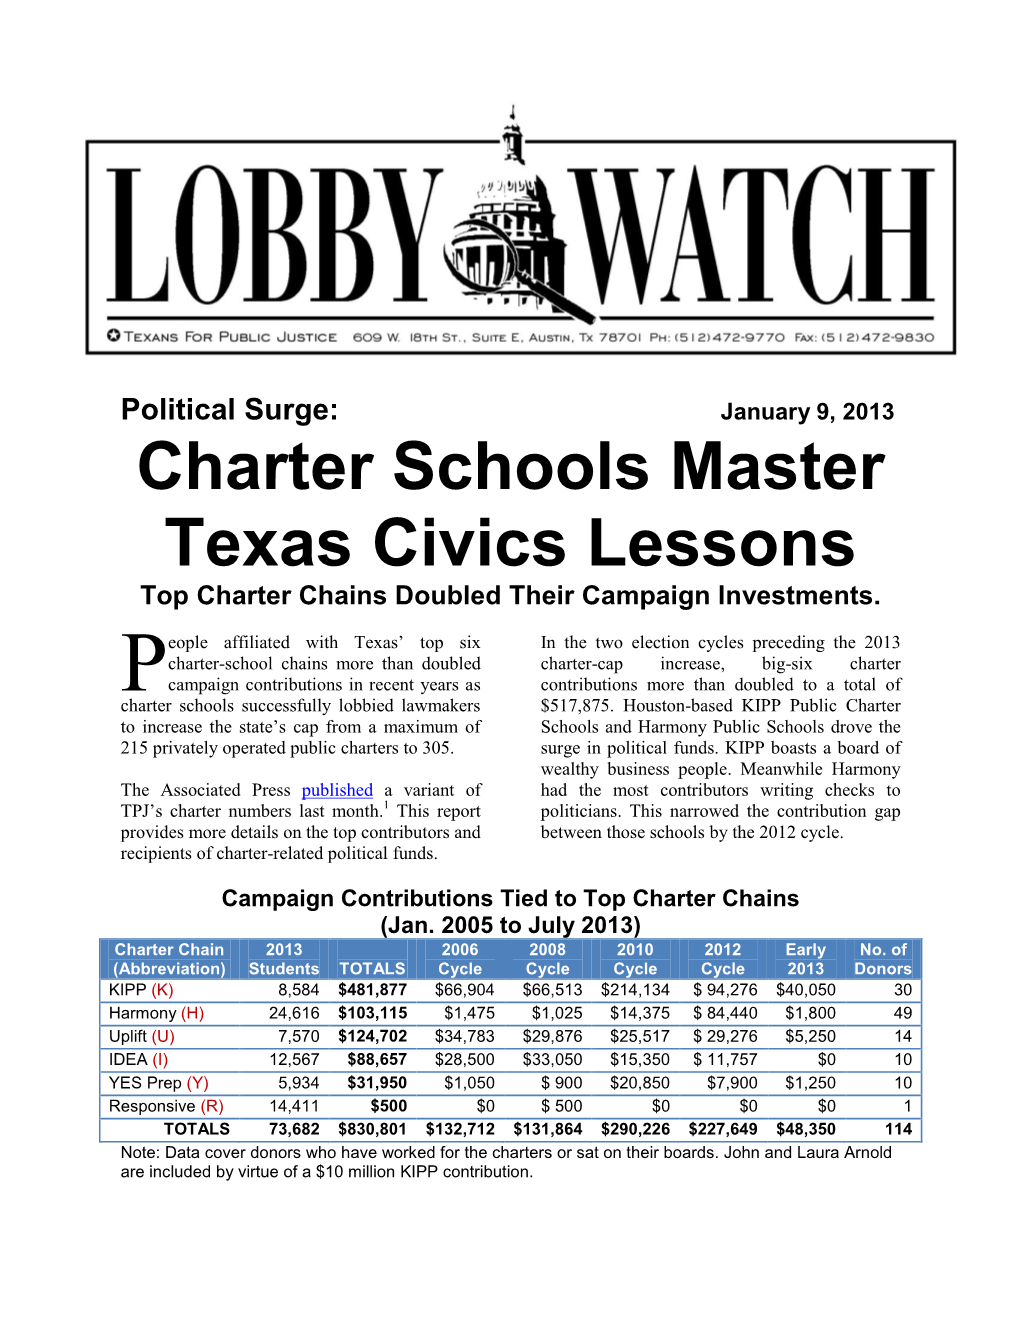 Charter Schools Master Texas Civics Lessons Top Charter Chains Doubled Their Campaign Investments